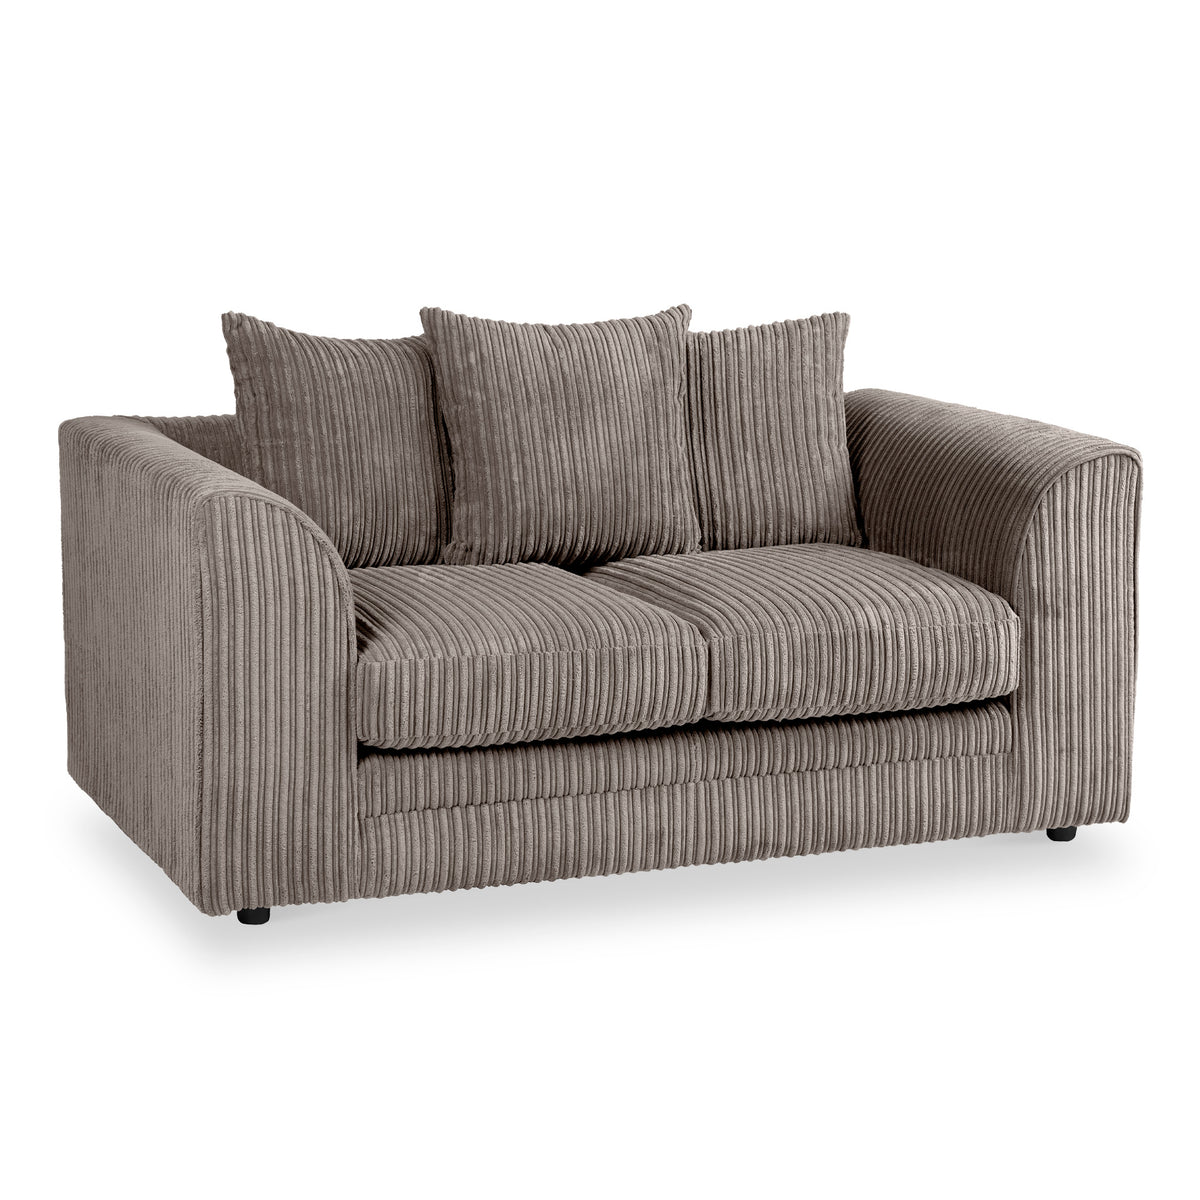 Bletchley Charcoal  Jumbo Cord 2 Seater Couch from Roseland Furniture